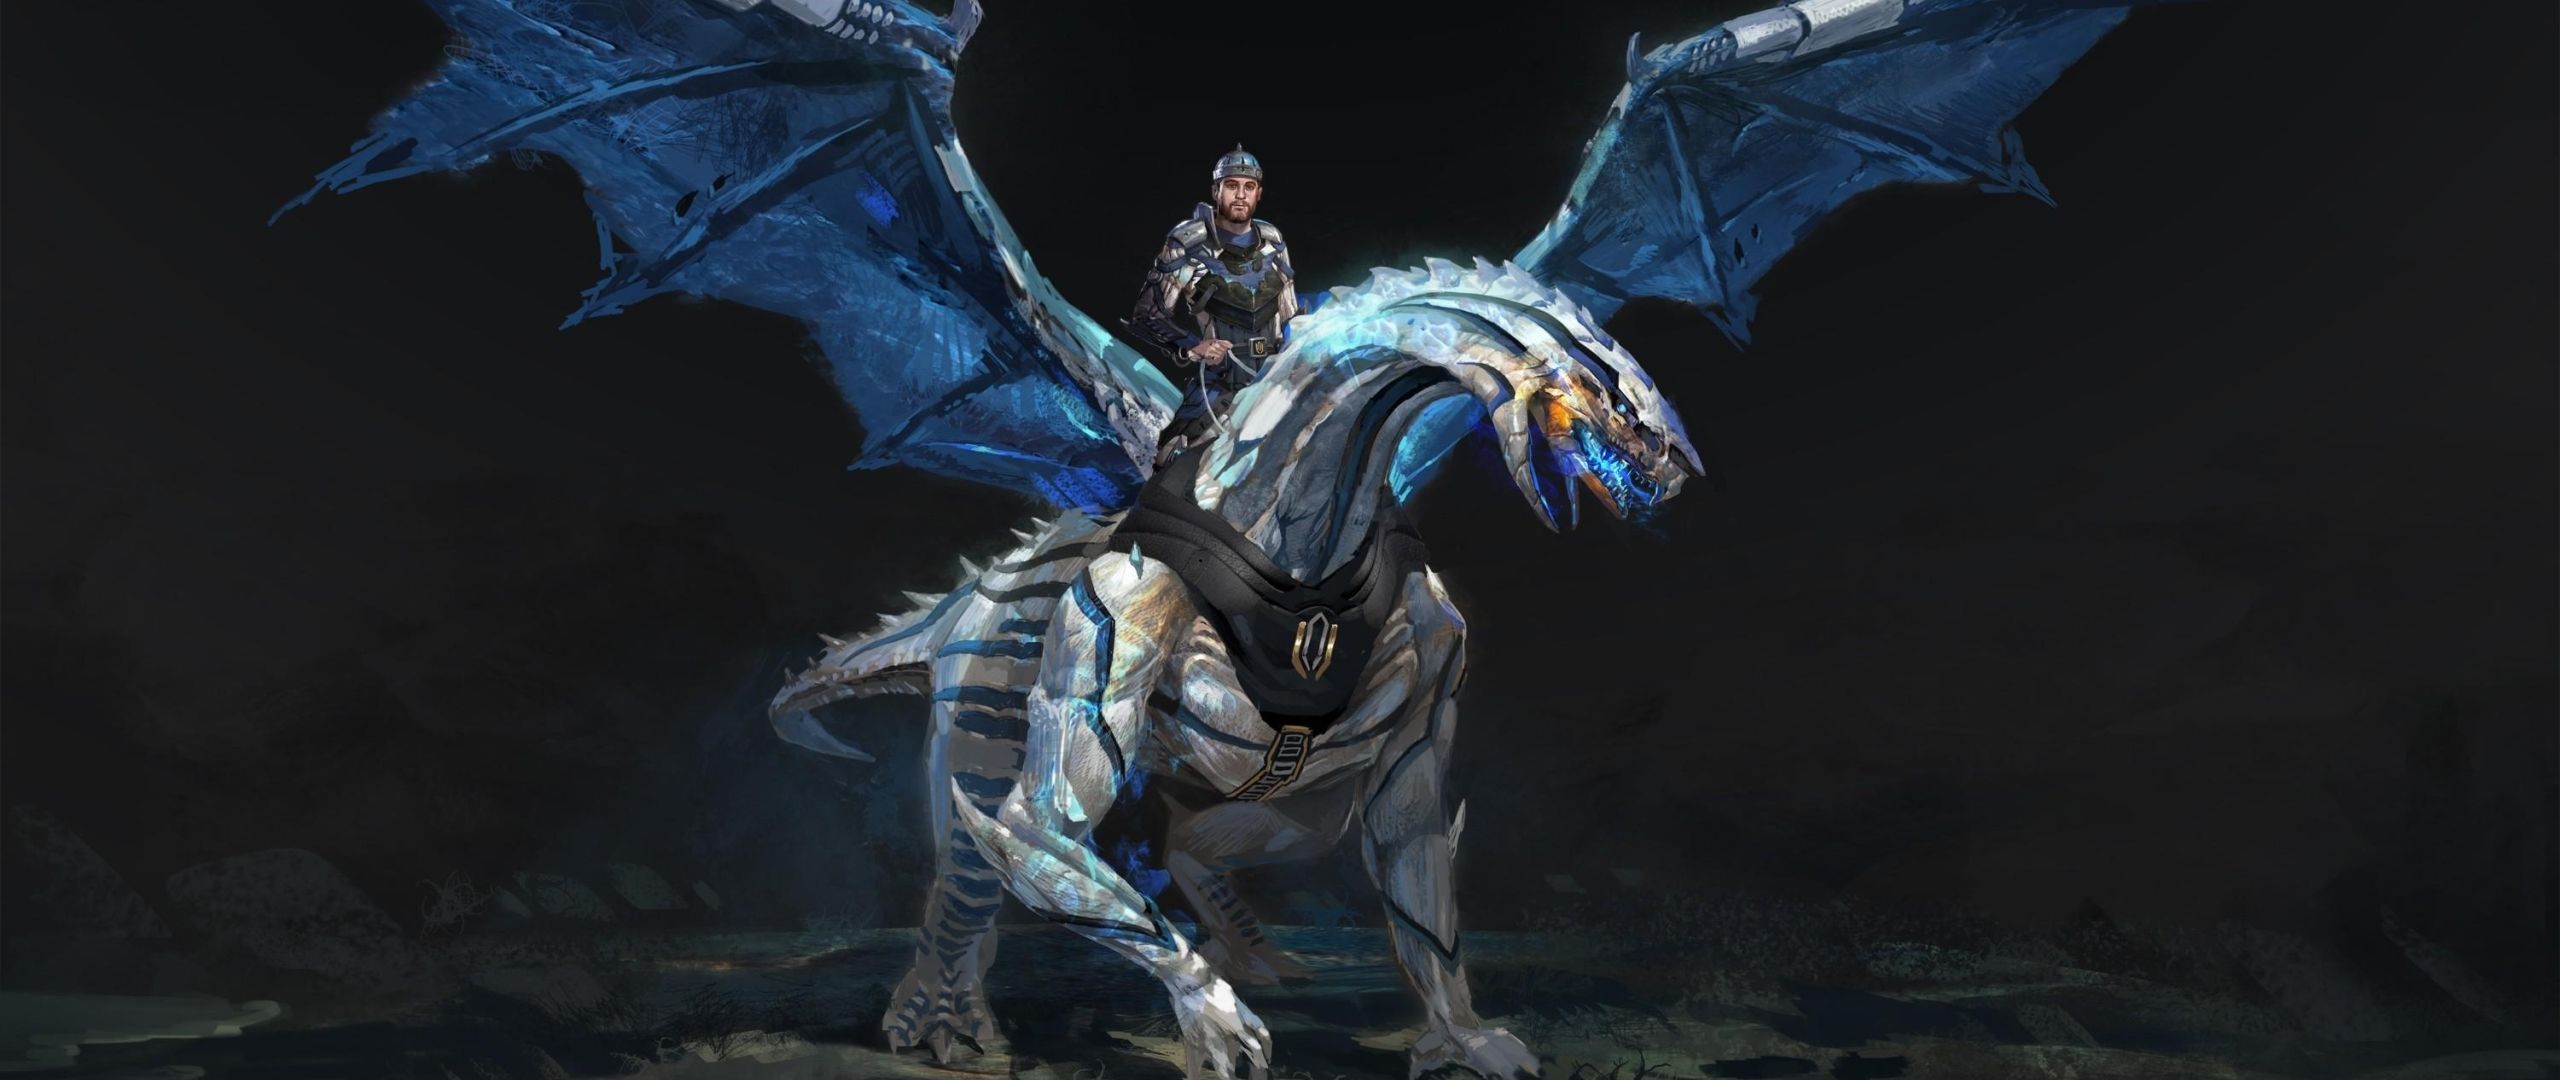 dragon, rider, wings 2560x1080 Resolution Wallpaper, HD Fantasy 4K Wallpaper, Image, Photo and Background